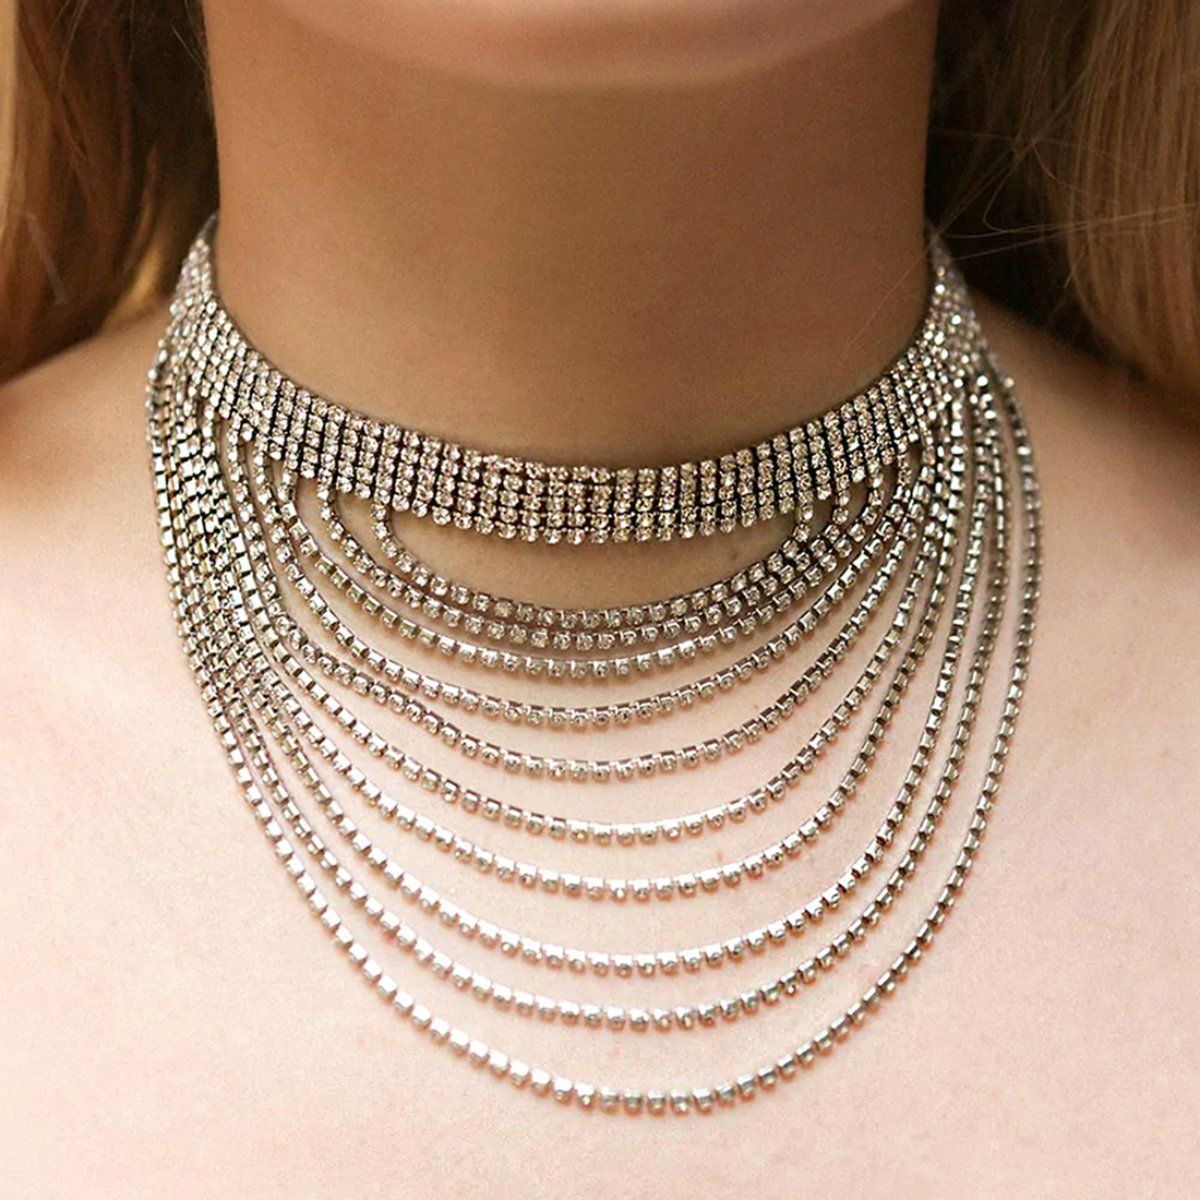 Sparkling Silver Clavicle Chain Choker Necklace For Women Fine Jewelry For  Weddings, Parties, And Birthdays From Andyandalanshop, $4.31 | DHgate.Com